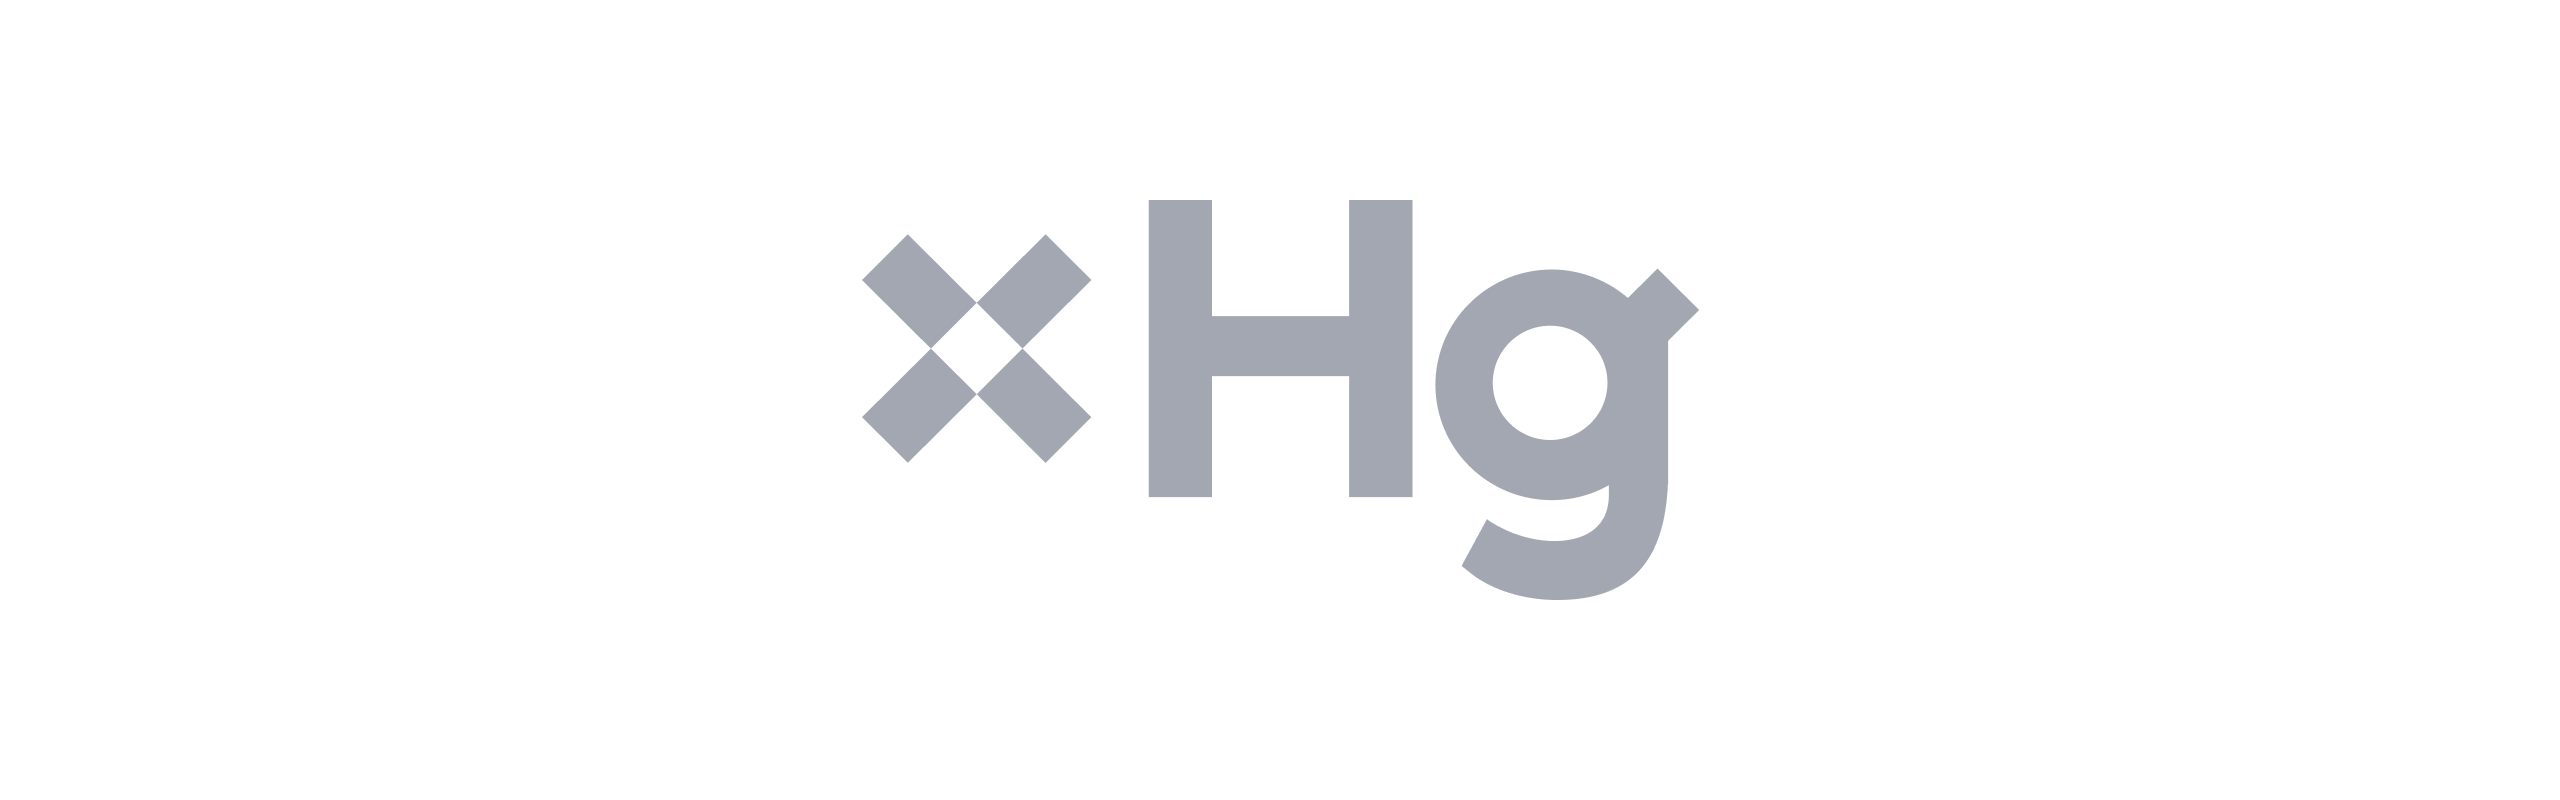 Technology & product due diligence | Code & Co. advises Hg Capital (logo shown)